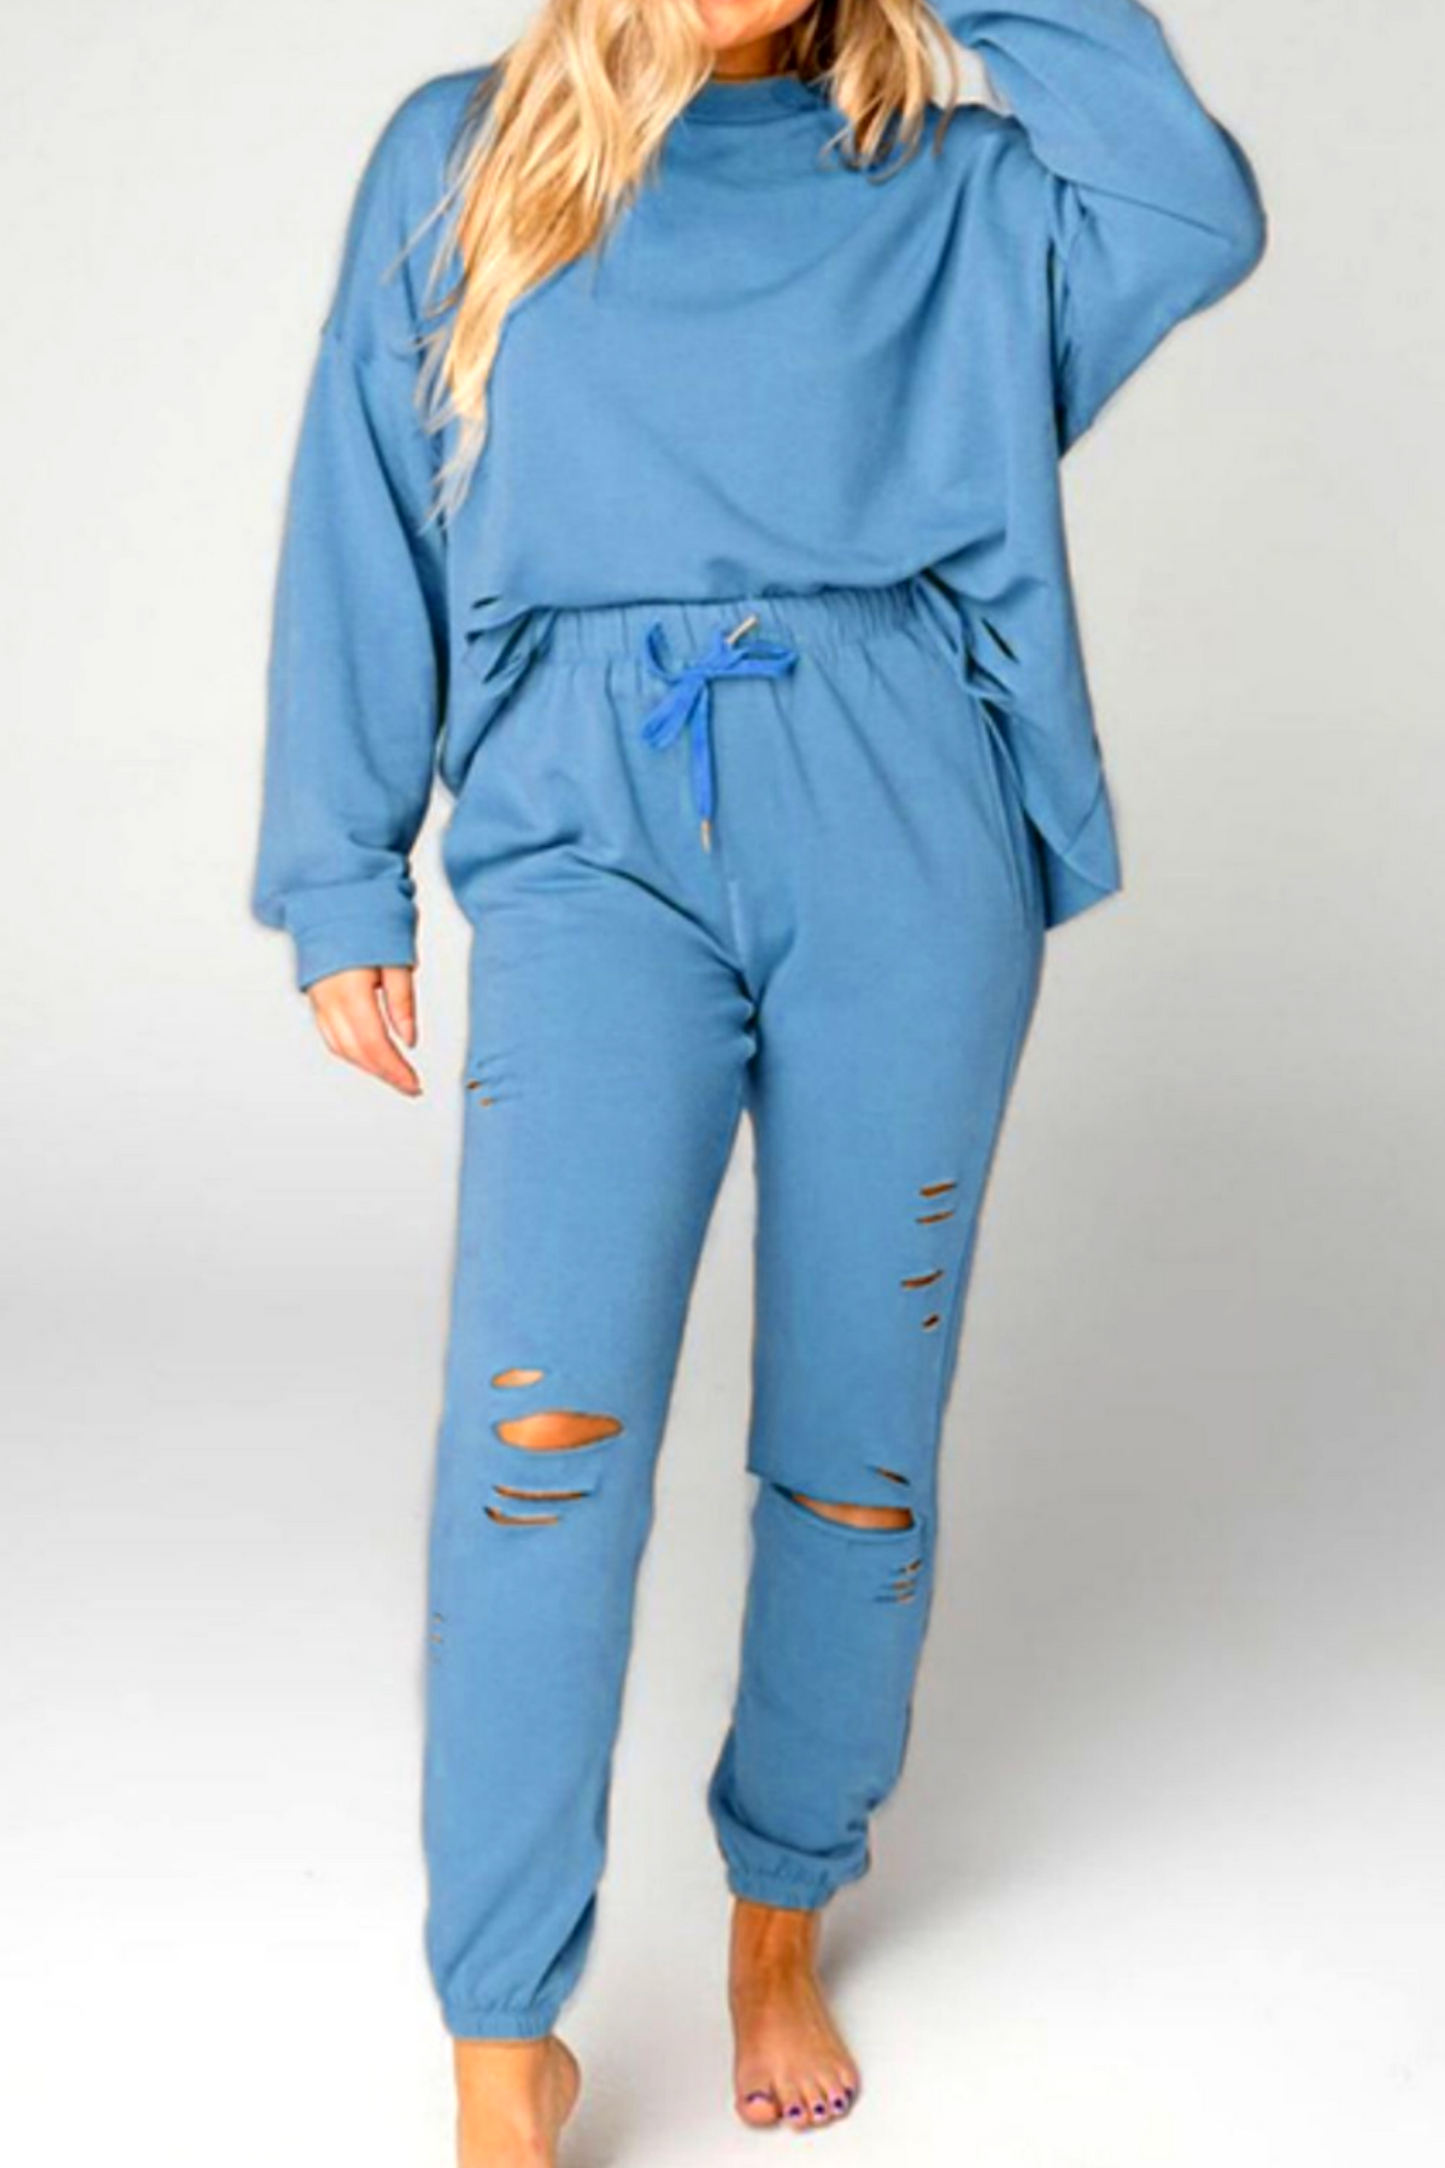 Distressed Sweatshirt and Joggers Set In Misty Blue